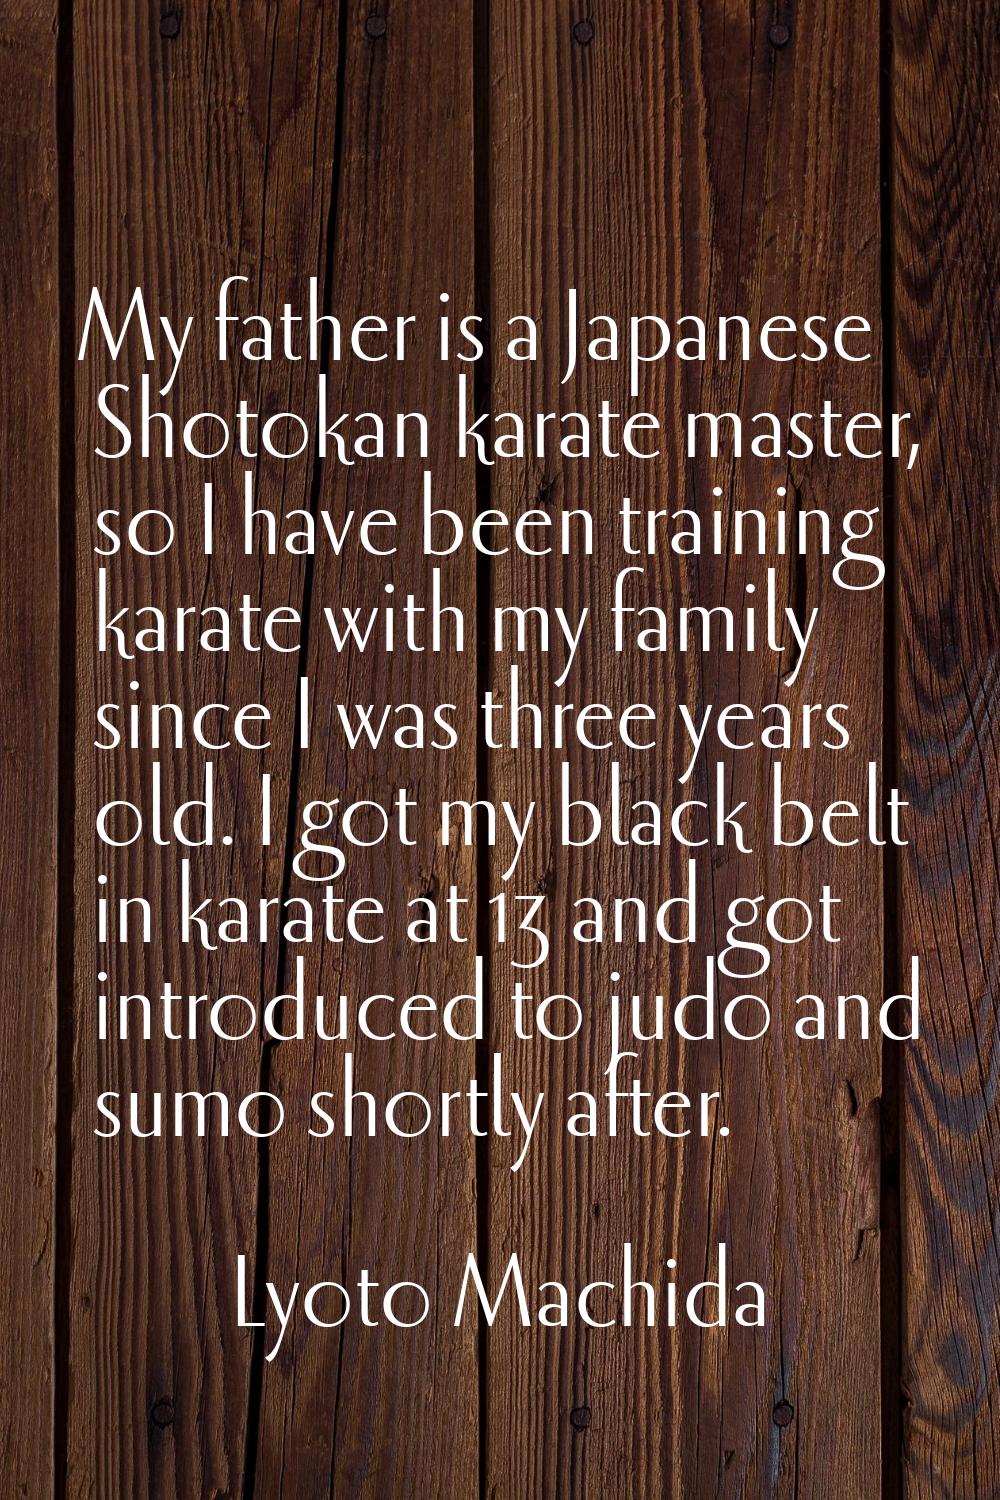 My father is a Japanese Shotokan karate master, so I have been training karate with my family since